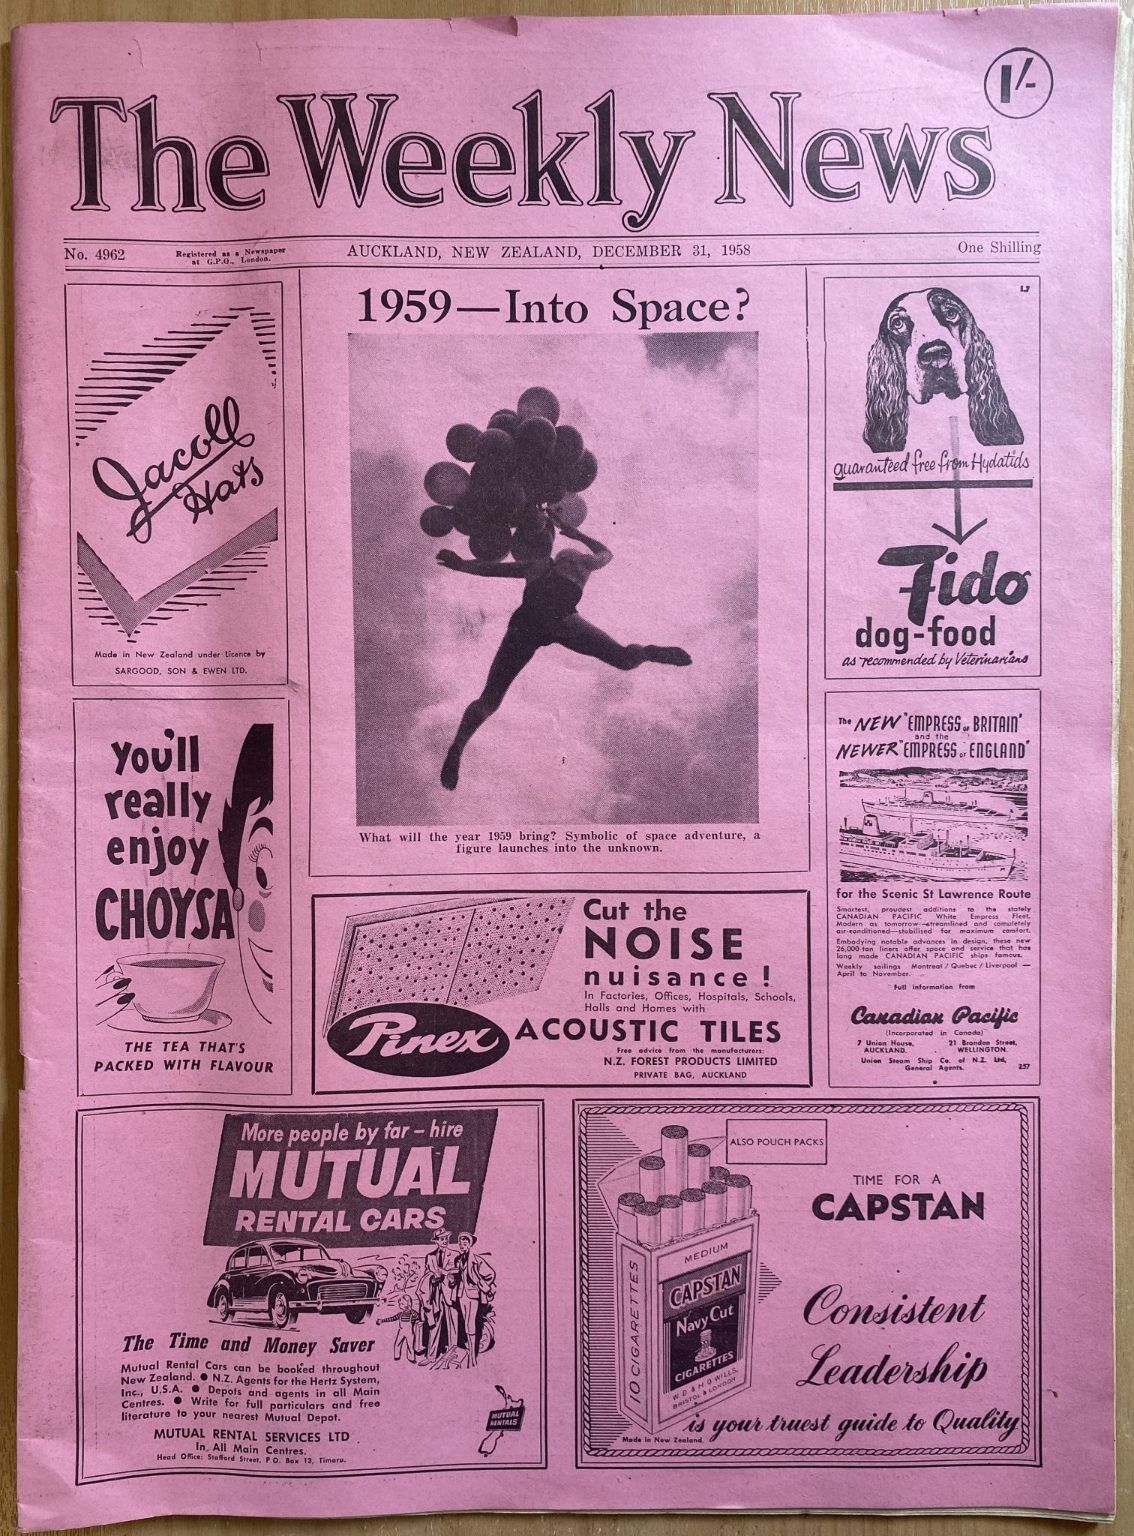 OLD NEWSPAPER: The Weekly News, No. 4962, 31 December 1958